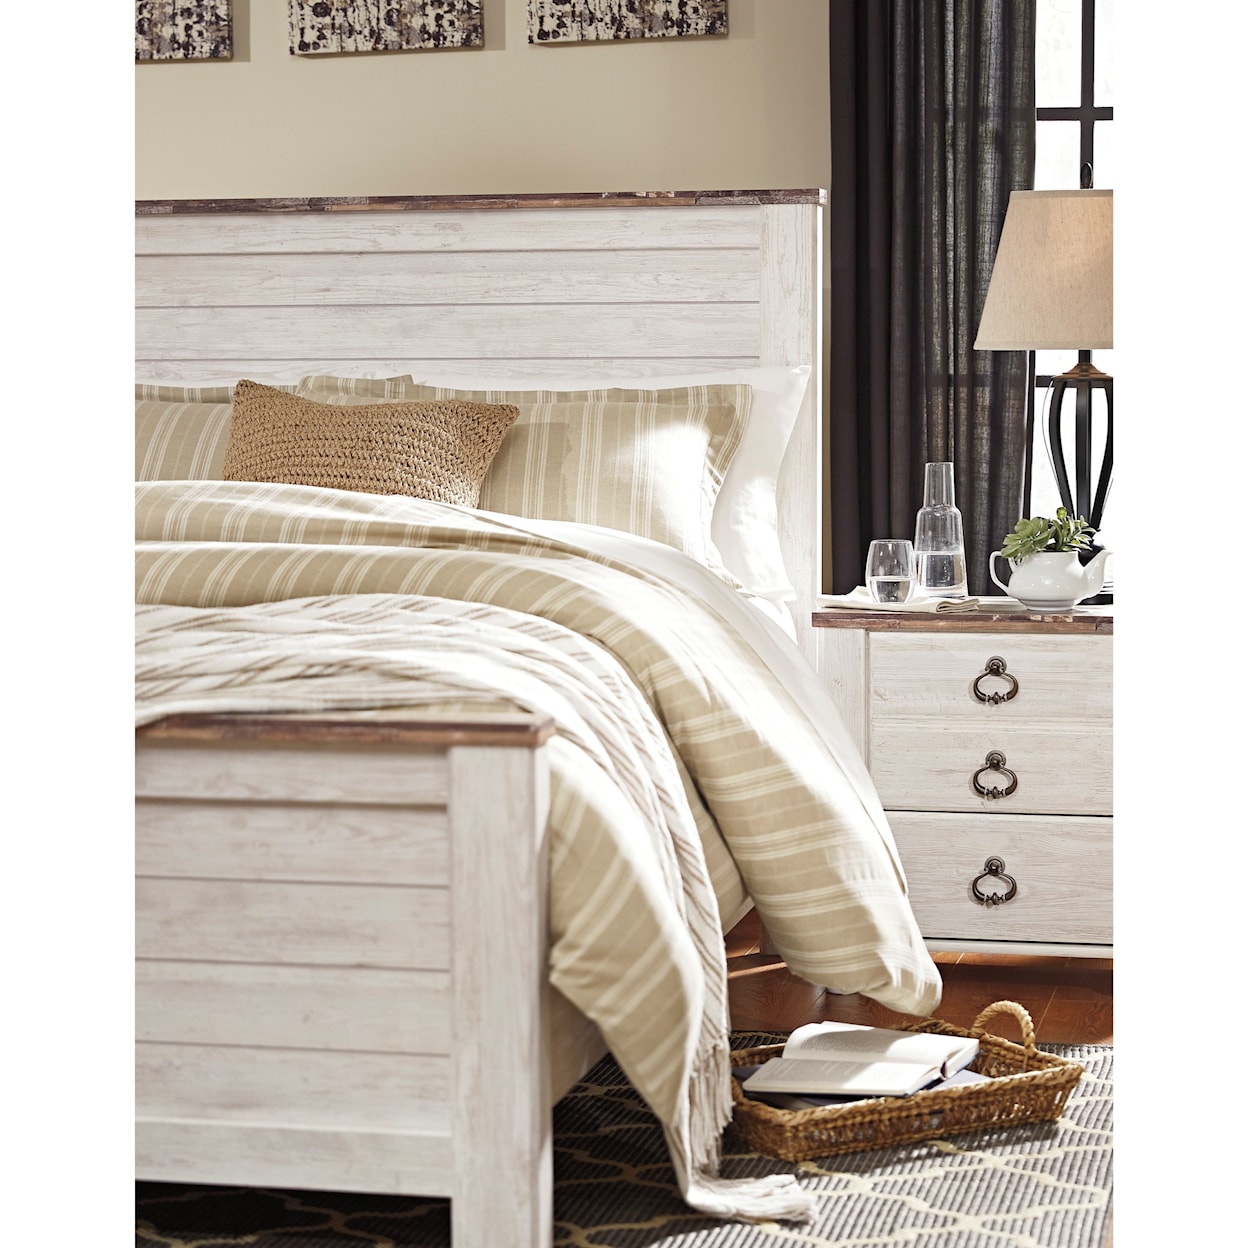 Benchcraft Willowton King Panel Bed